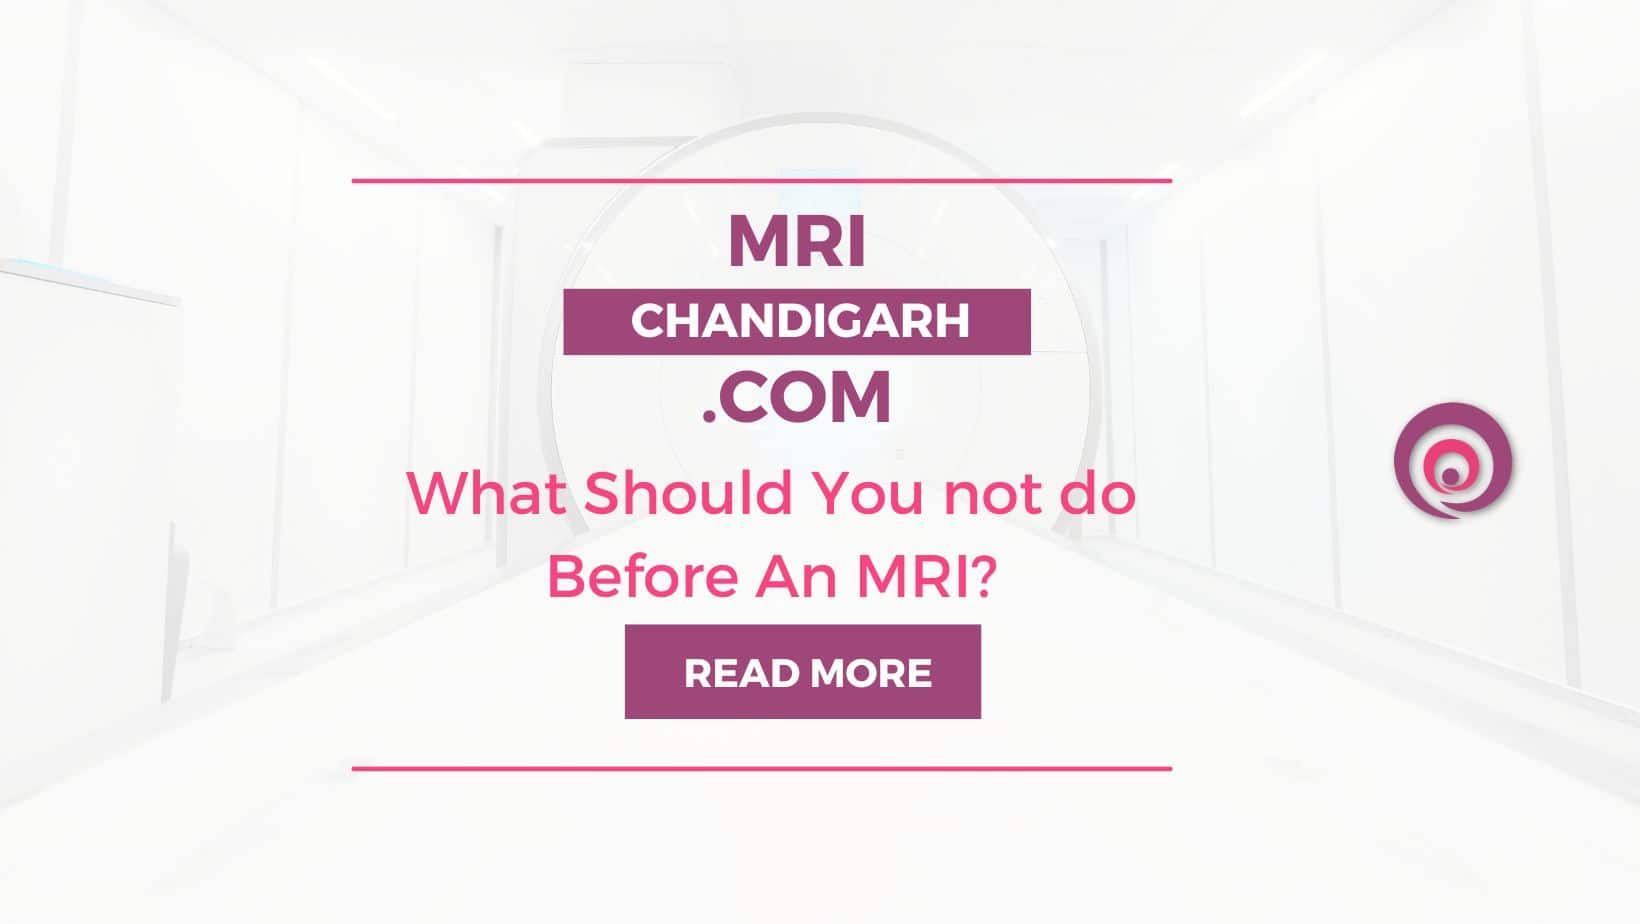 What Should You NOT Do Before An MRI?